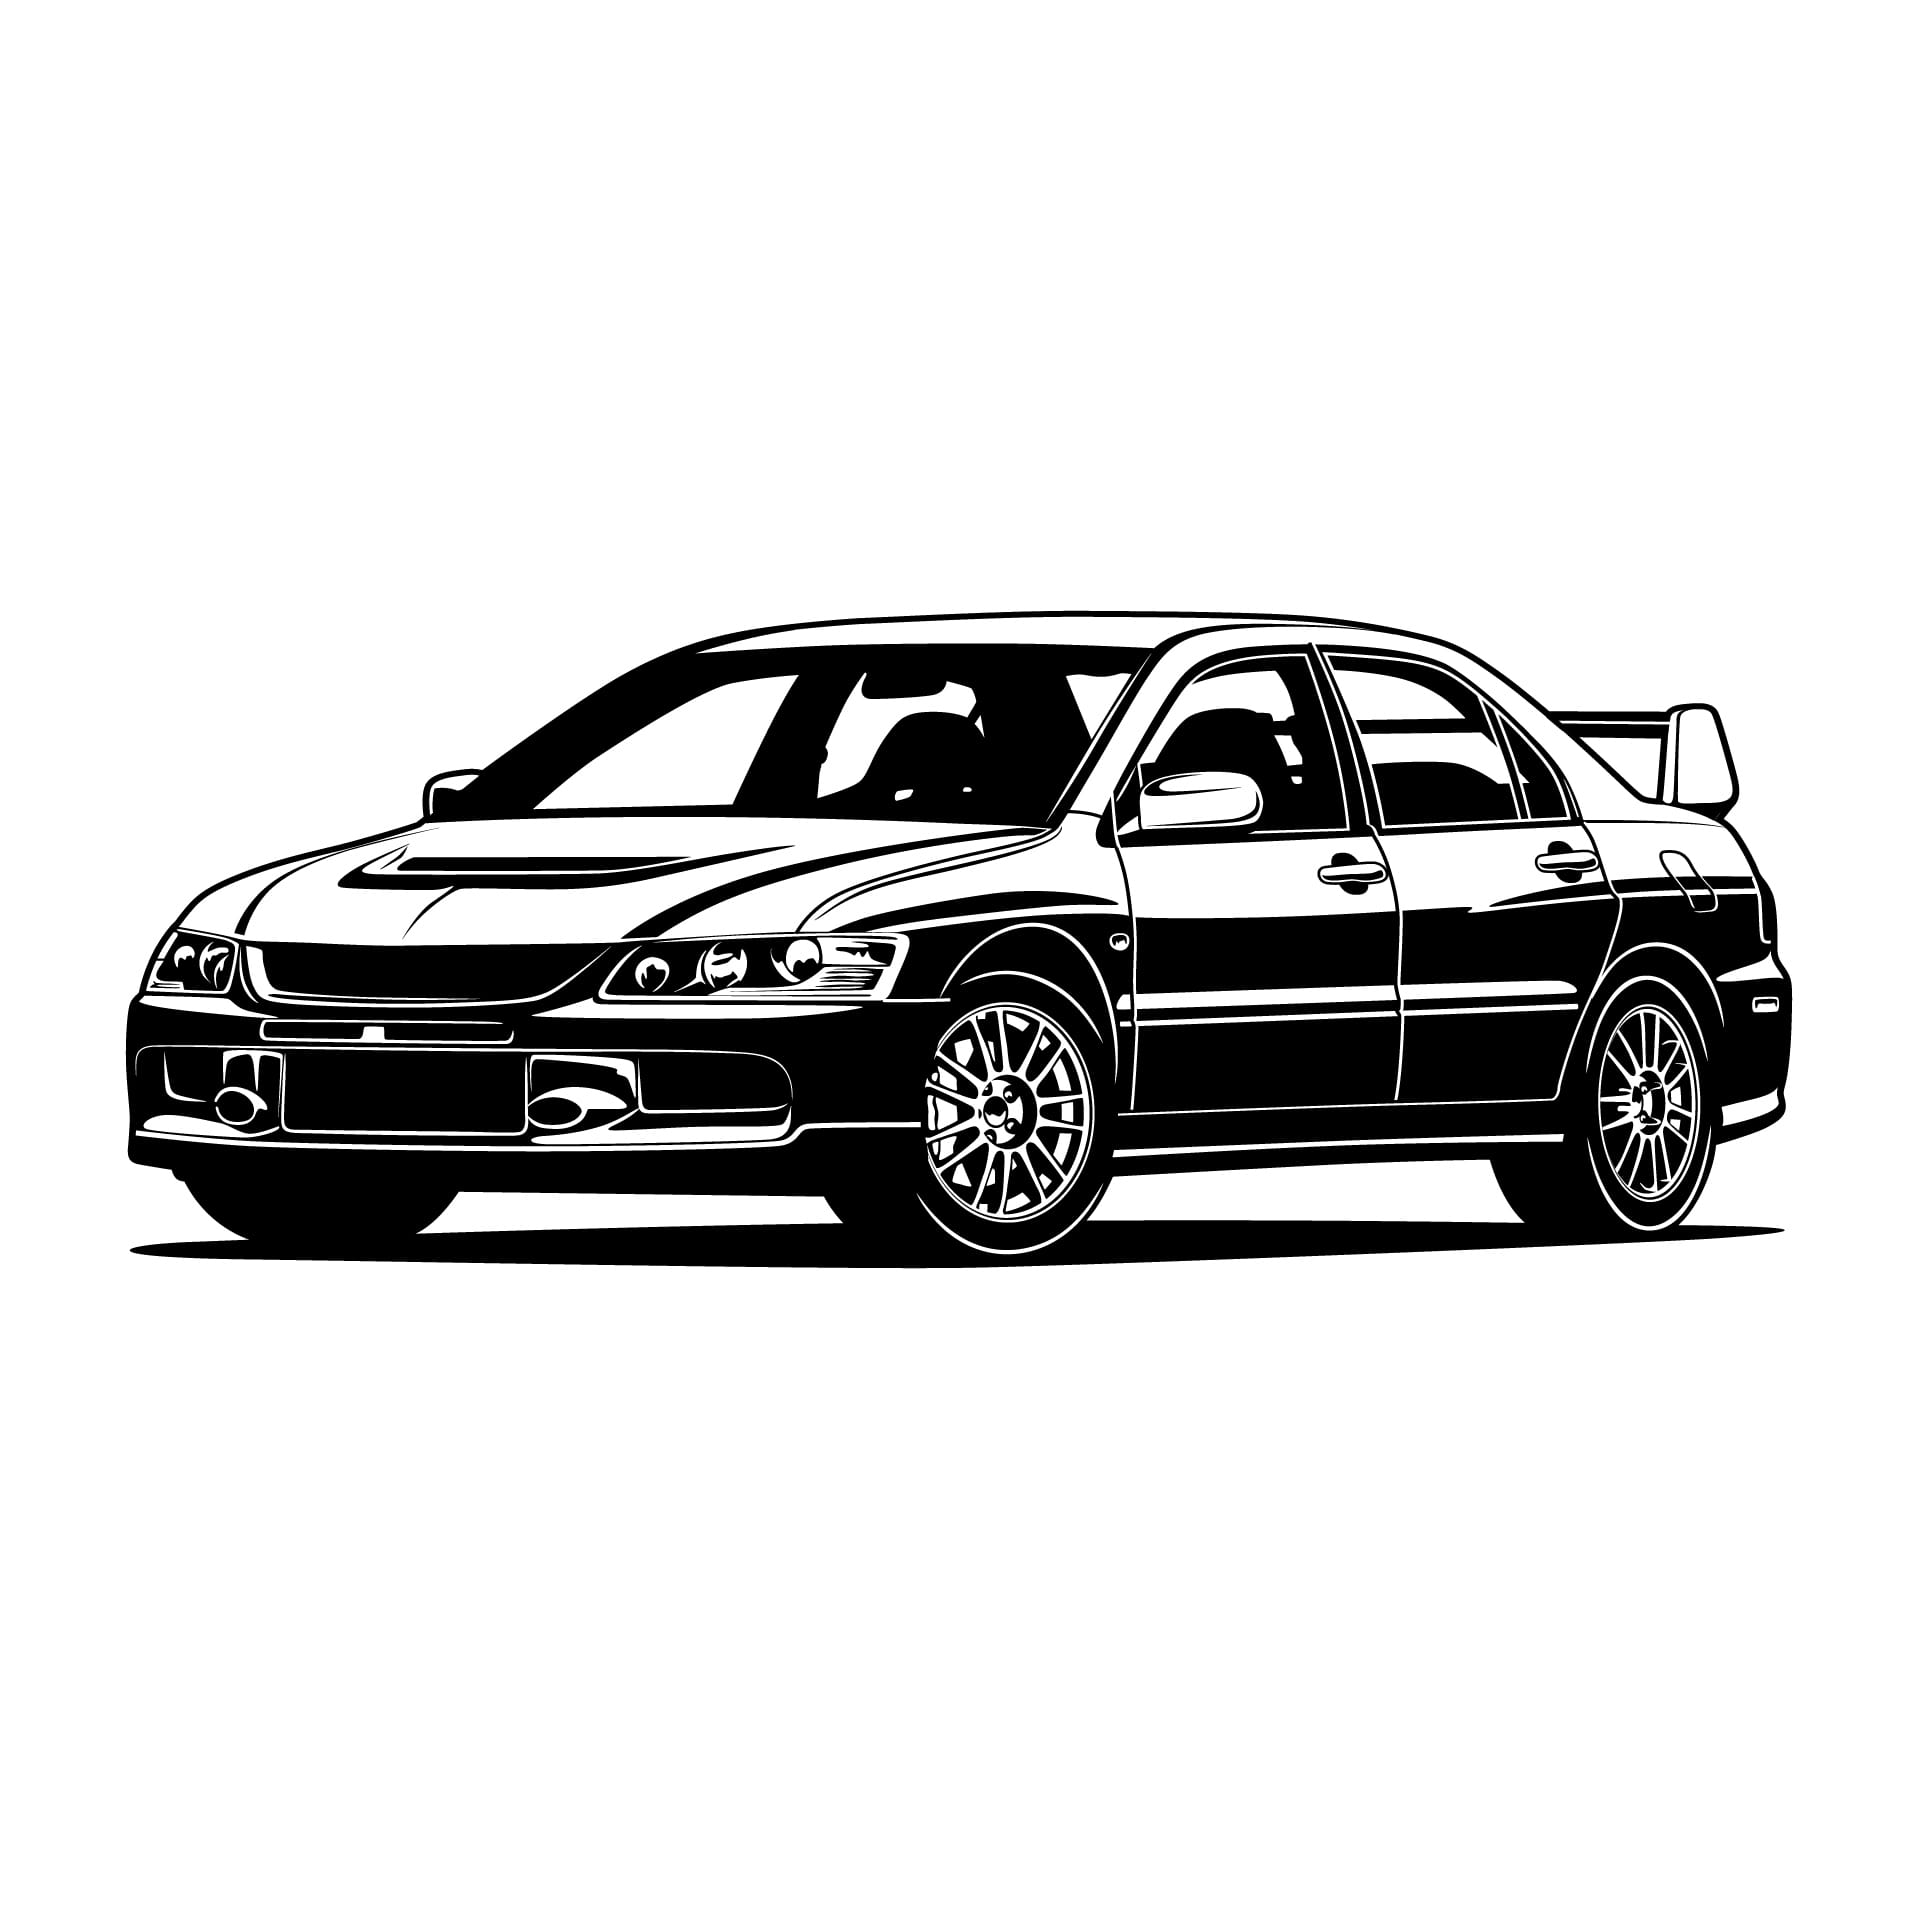 Car profile picture muscle car illustrations picture